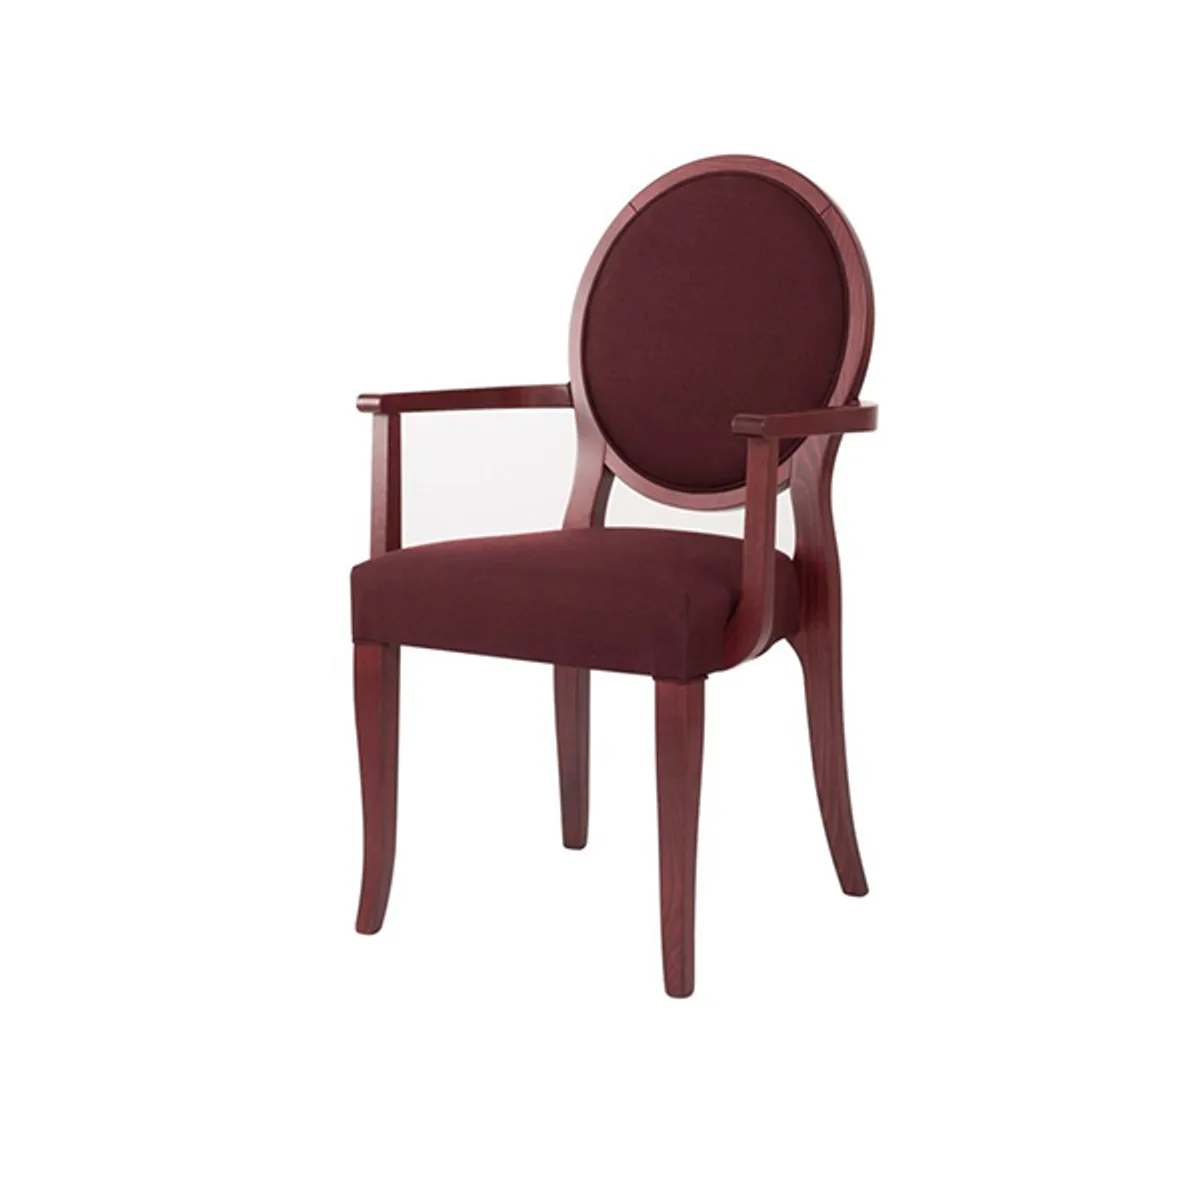 Rula armchair luxury hotel dining furiture by inside out contracts